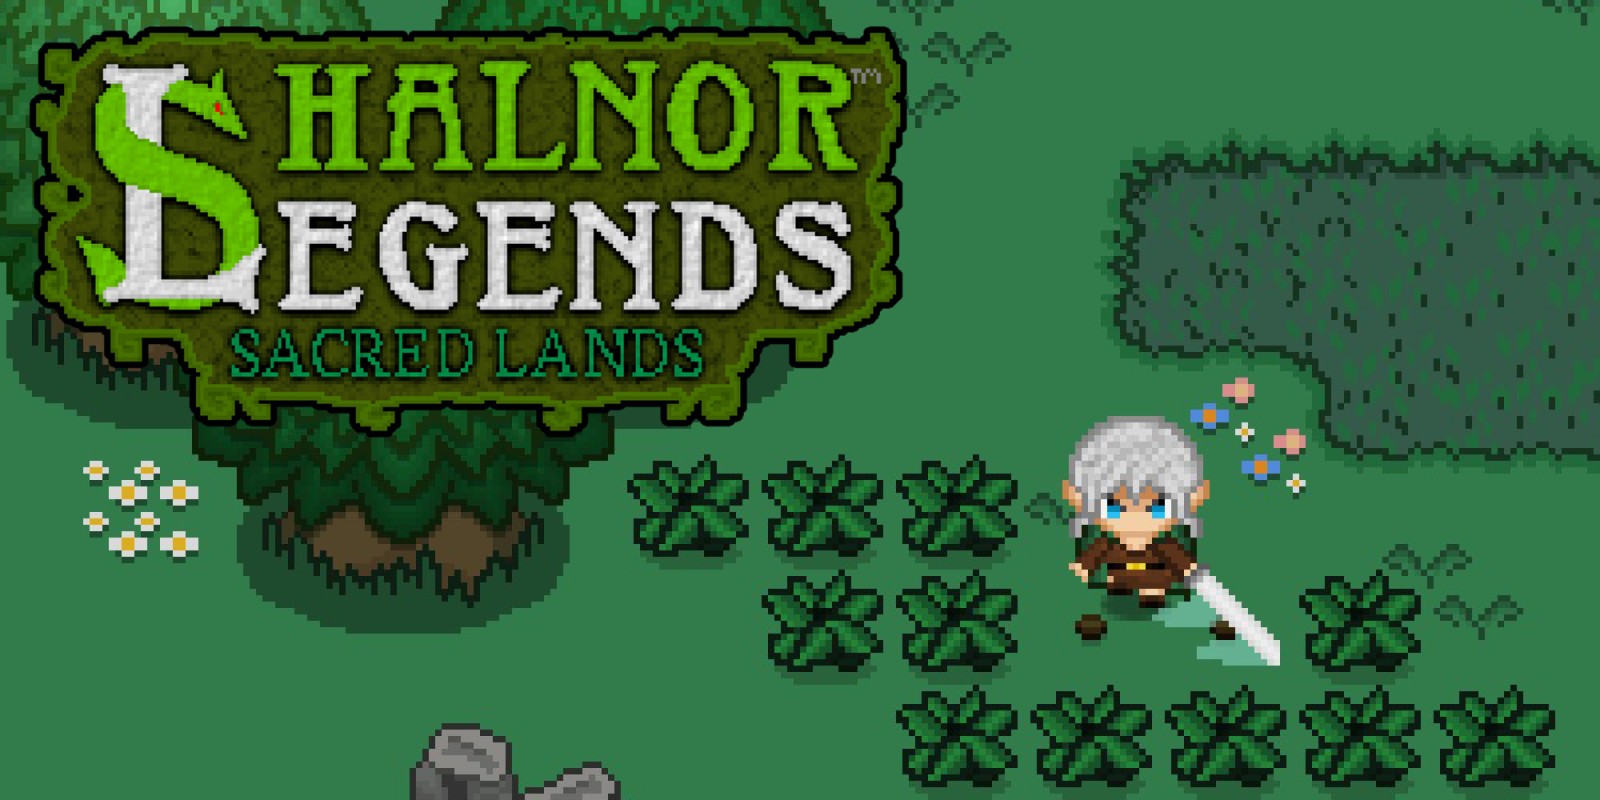 for ios download Shalnor Legends 2: Trials of Thunder